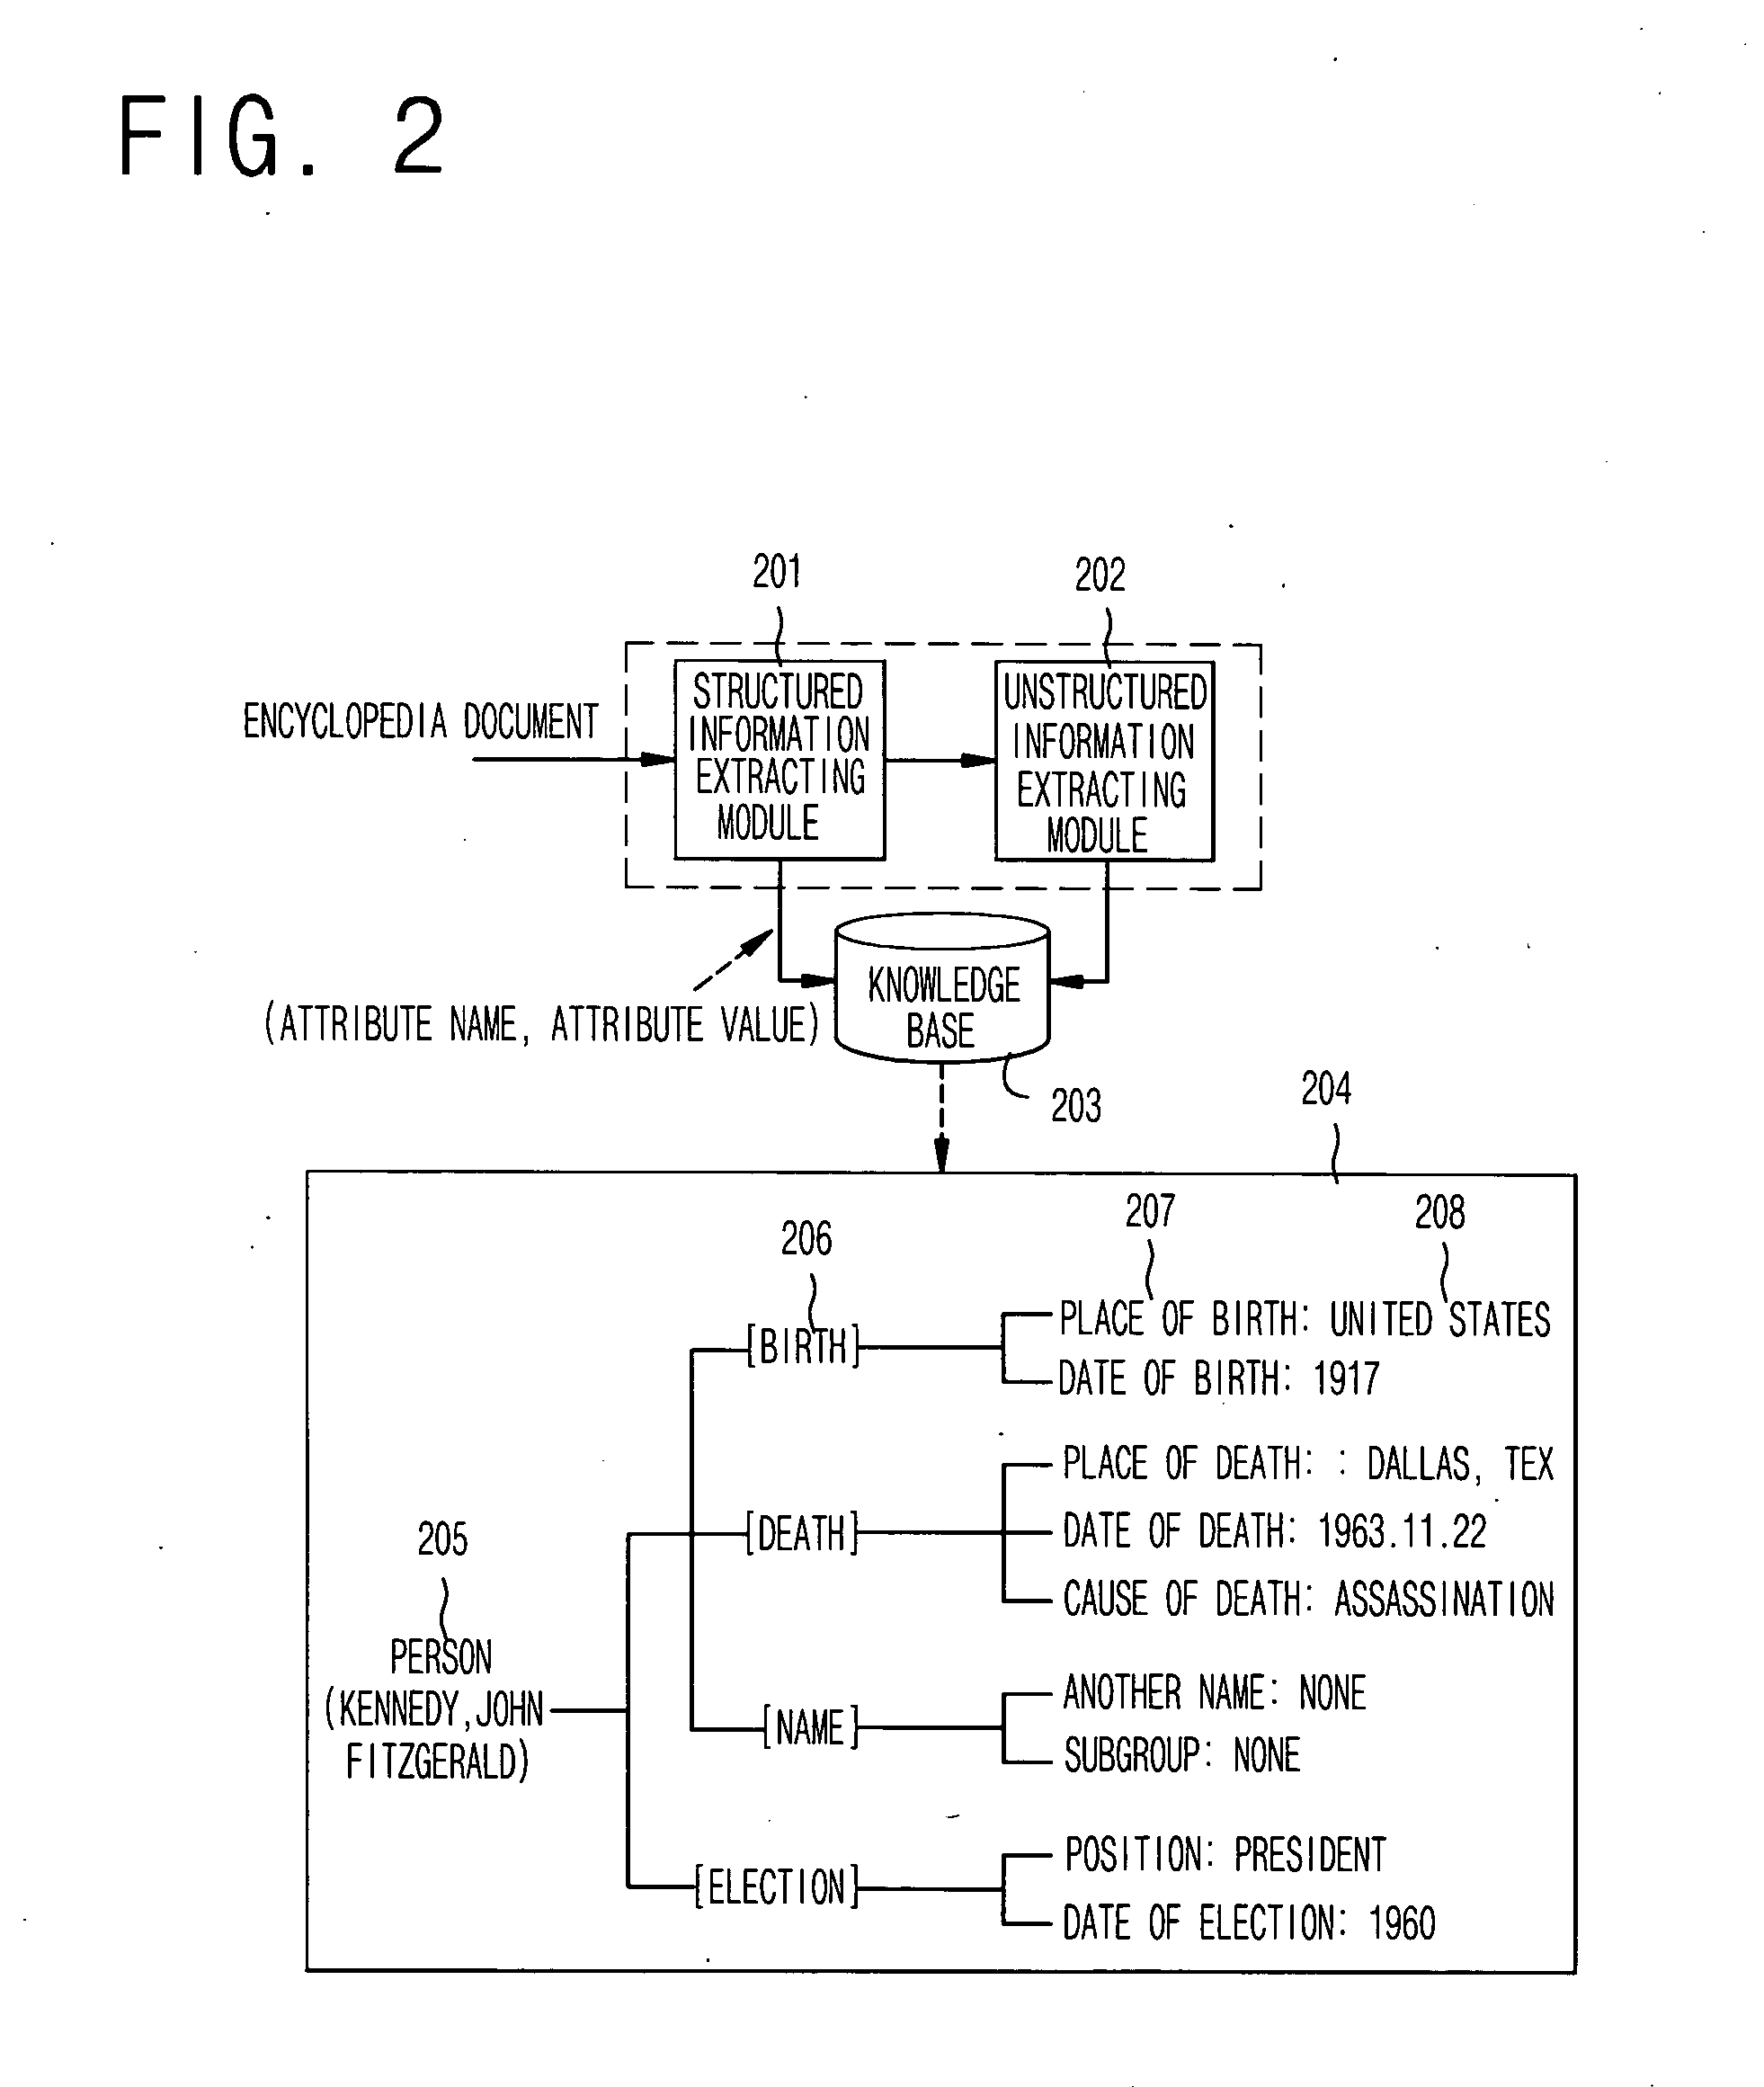 Semi-automatic construction method for knowledge base of encyclopedia question answering system